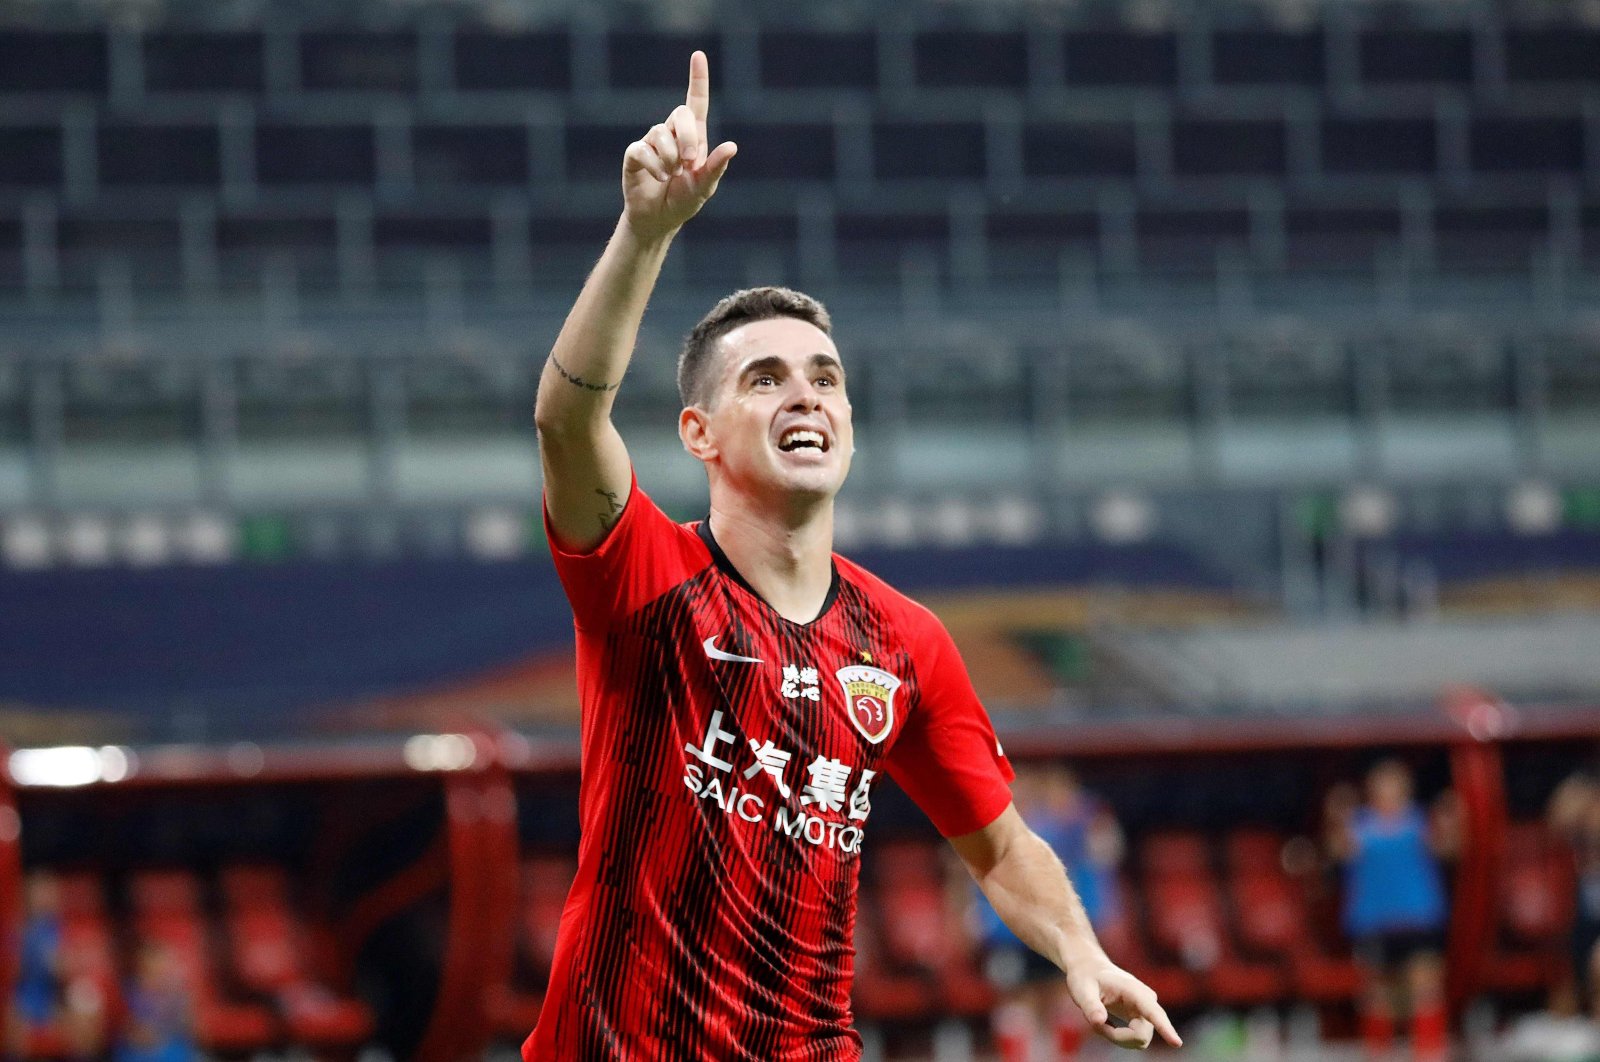 Shanghai SIPG's Oscar gesturing to fans during a Chinese Super League football match against Beijing Guoan, in Suzhou, China, Aug. 22, 2020. (AFP Photo)
